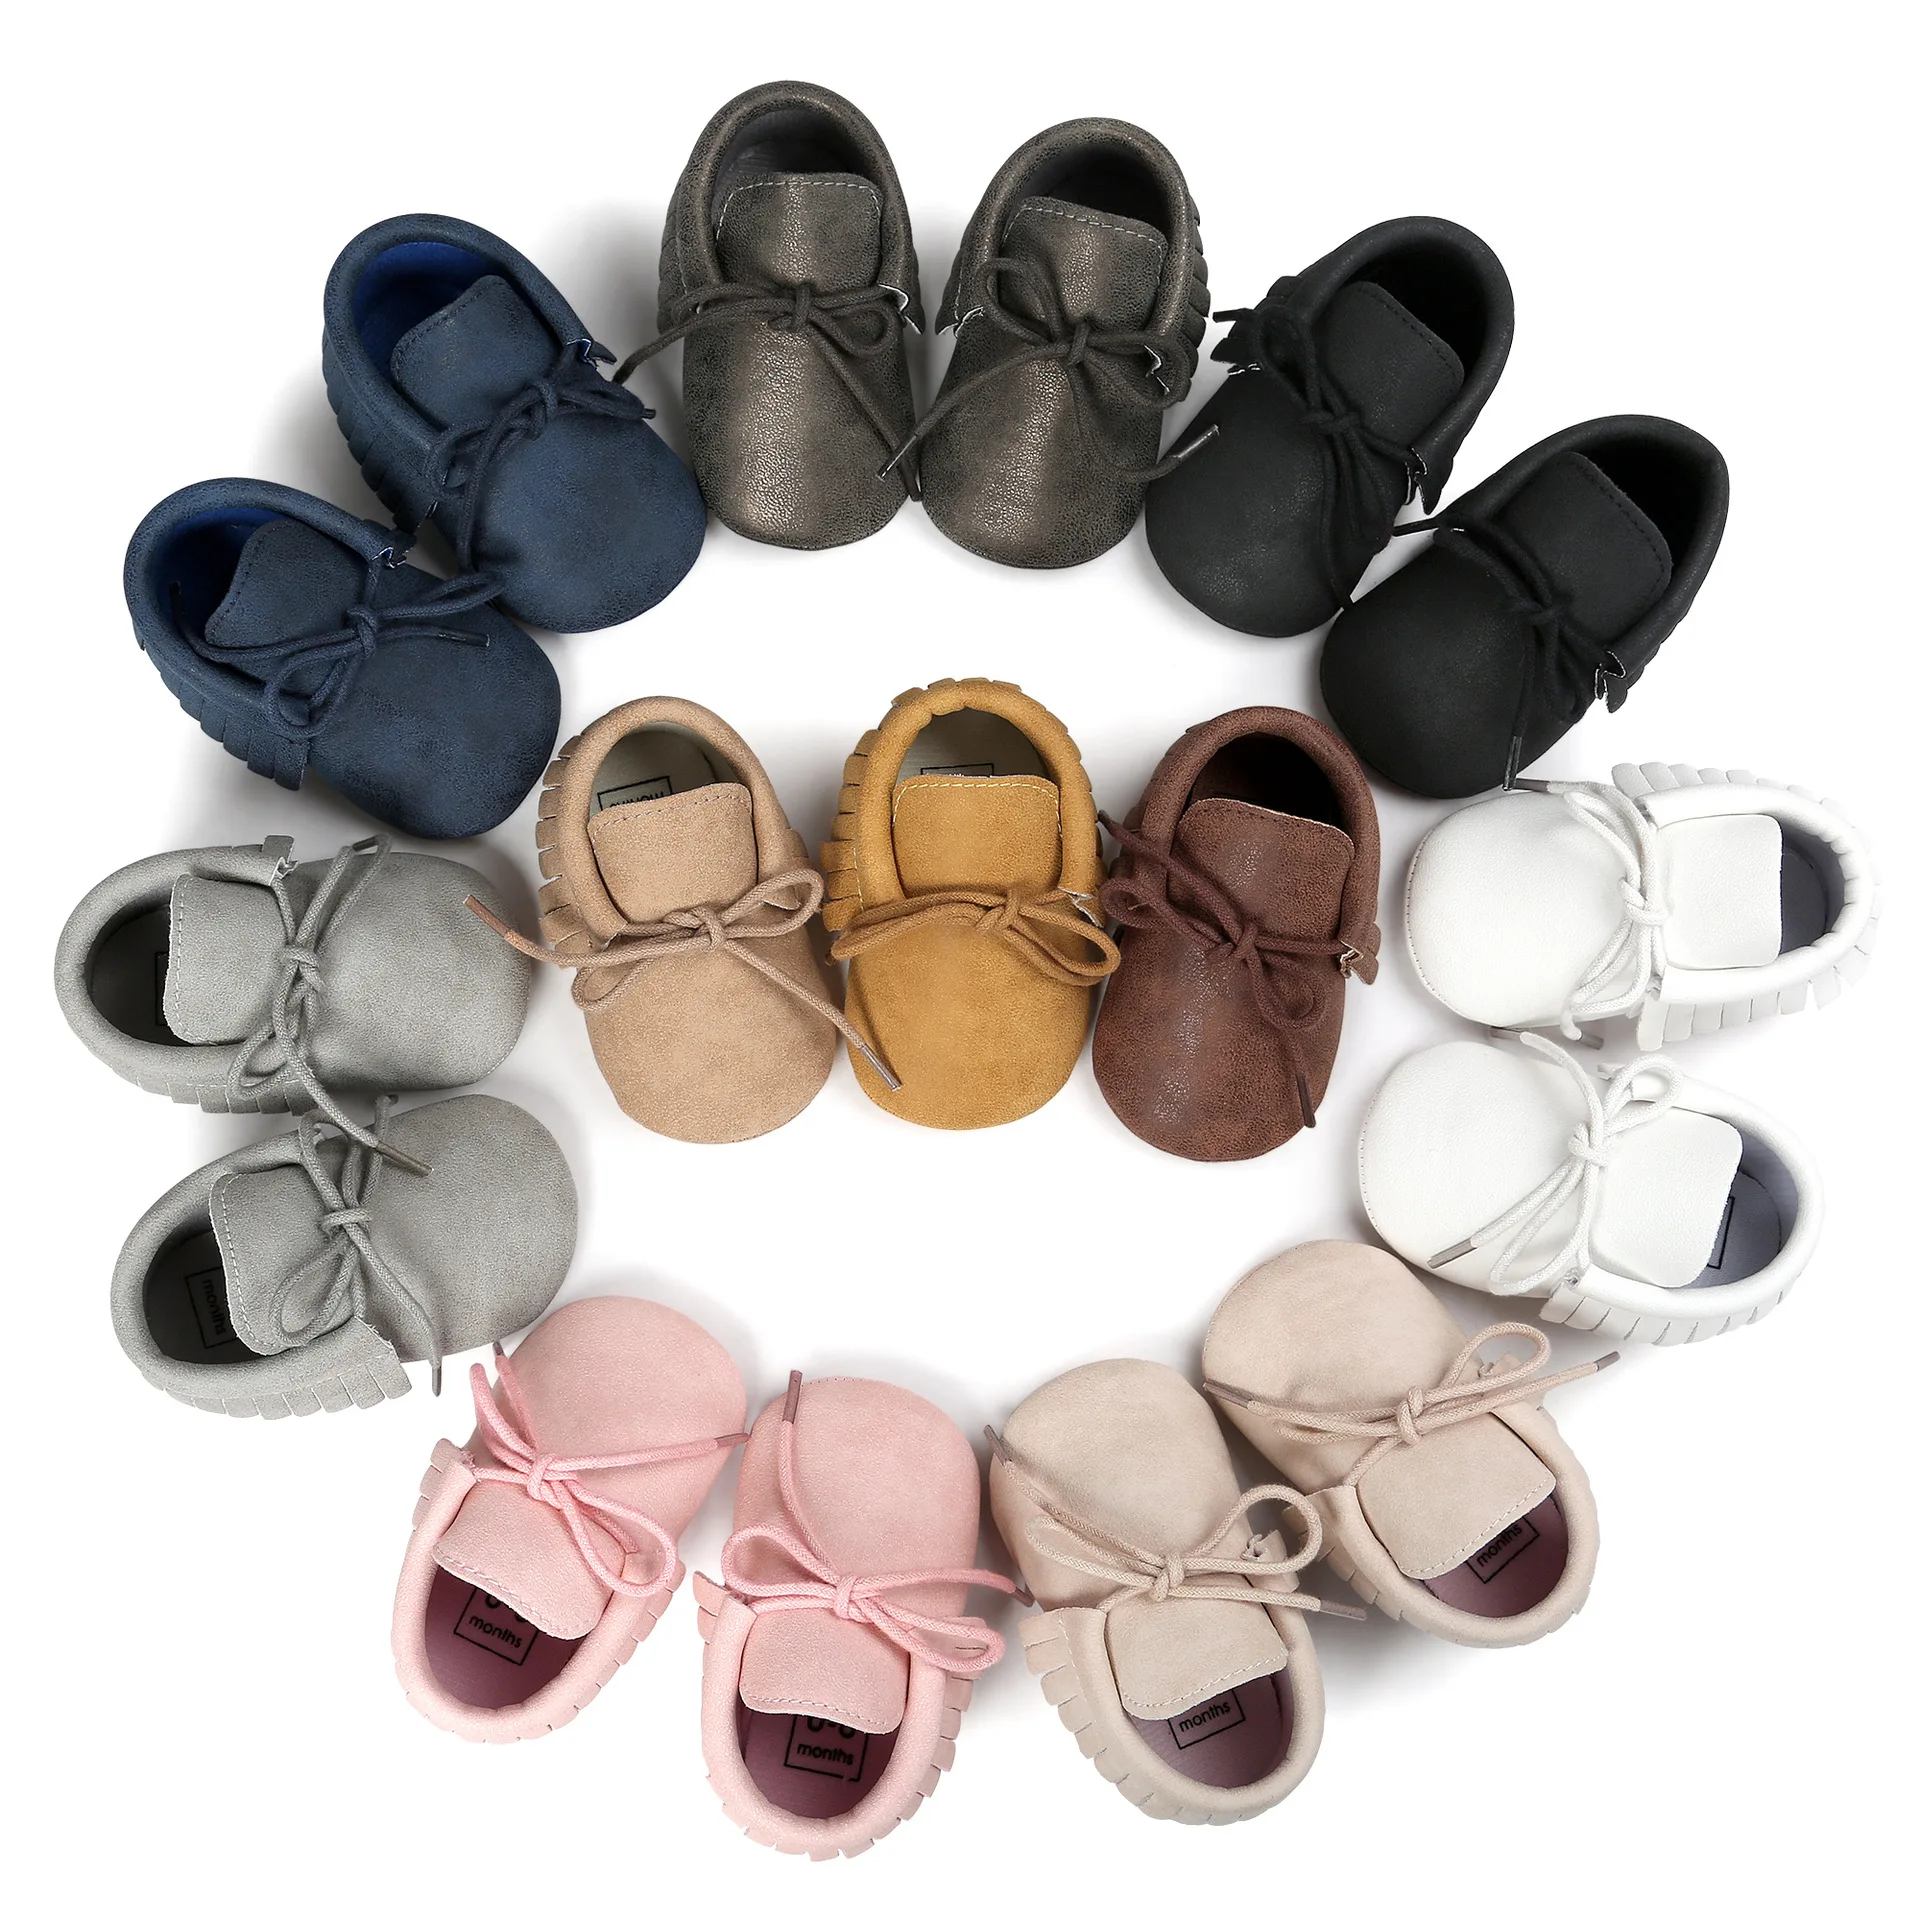 

6240 Newborn Casual Baby Shoes Infant Baby Girl Crib Shoes Cute Soft Sole Prewalker Sneakers Walking Shoes Toddler First Walker